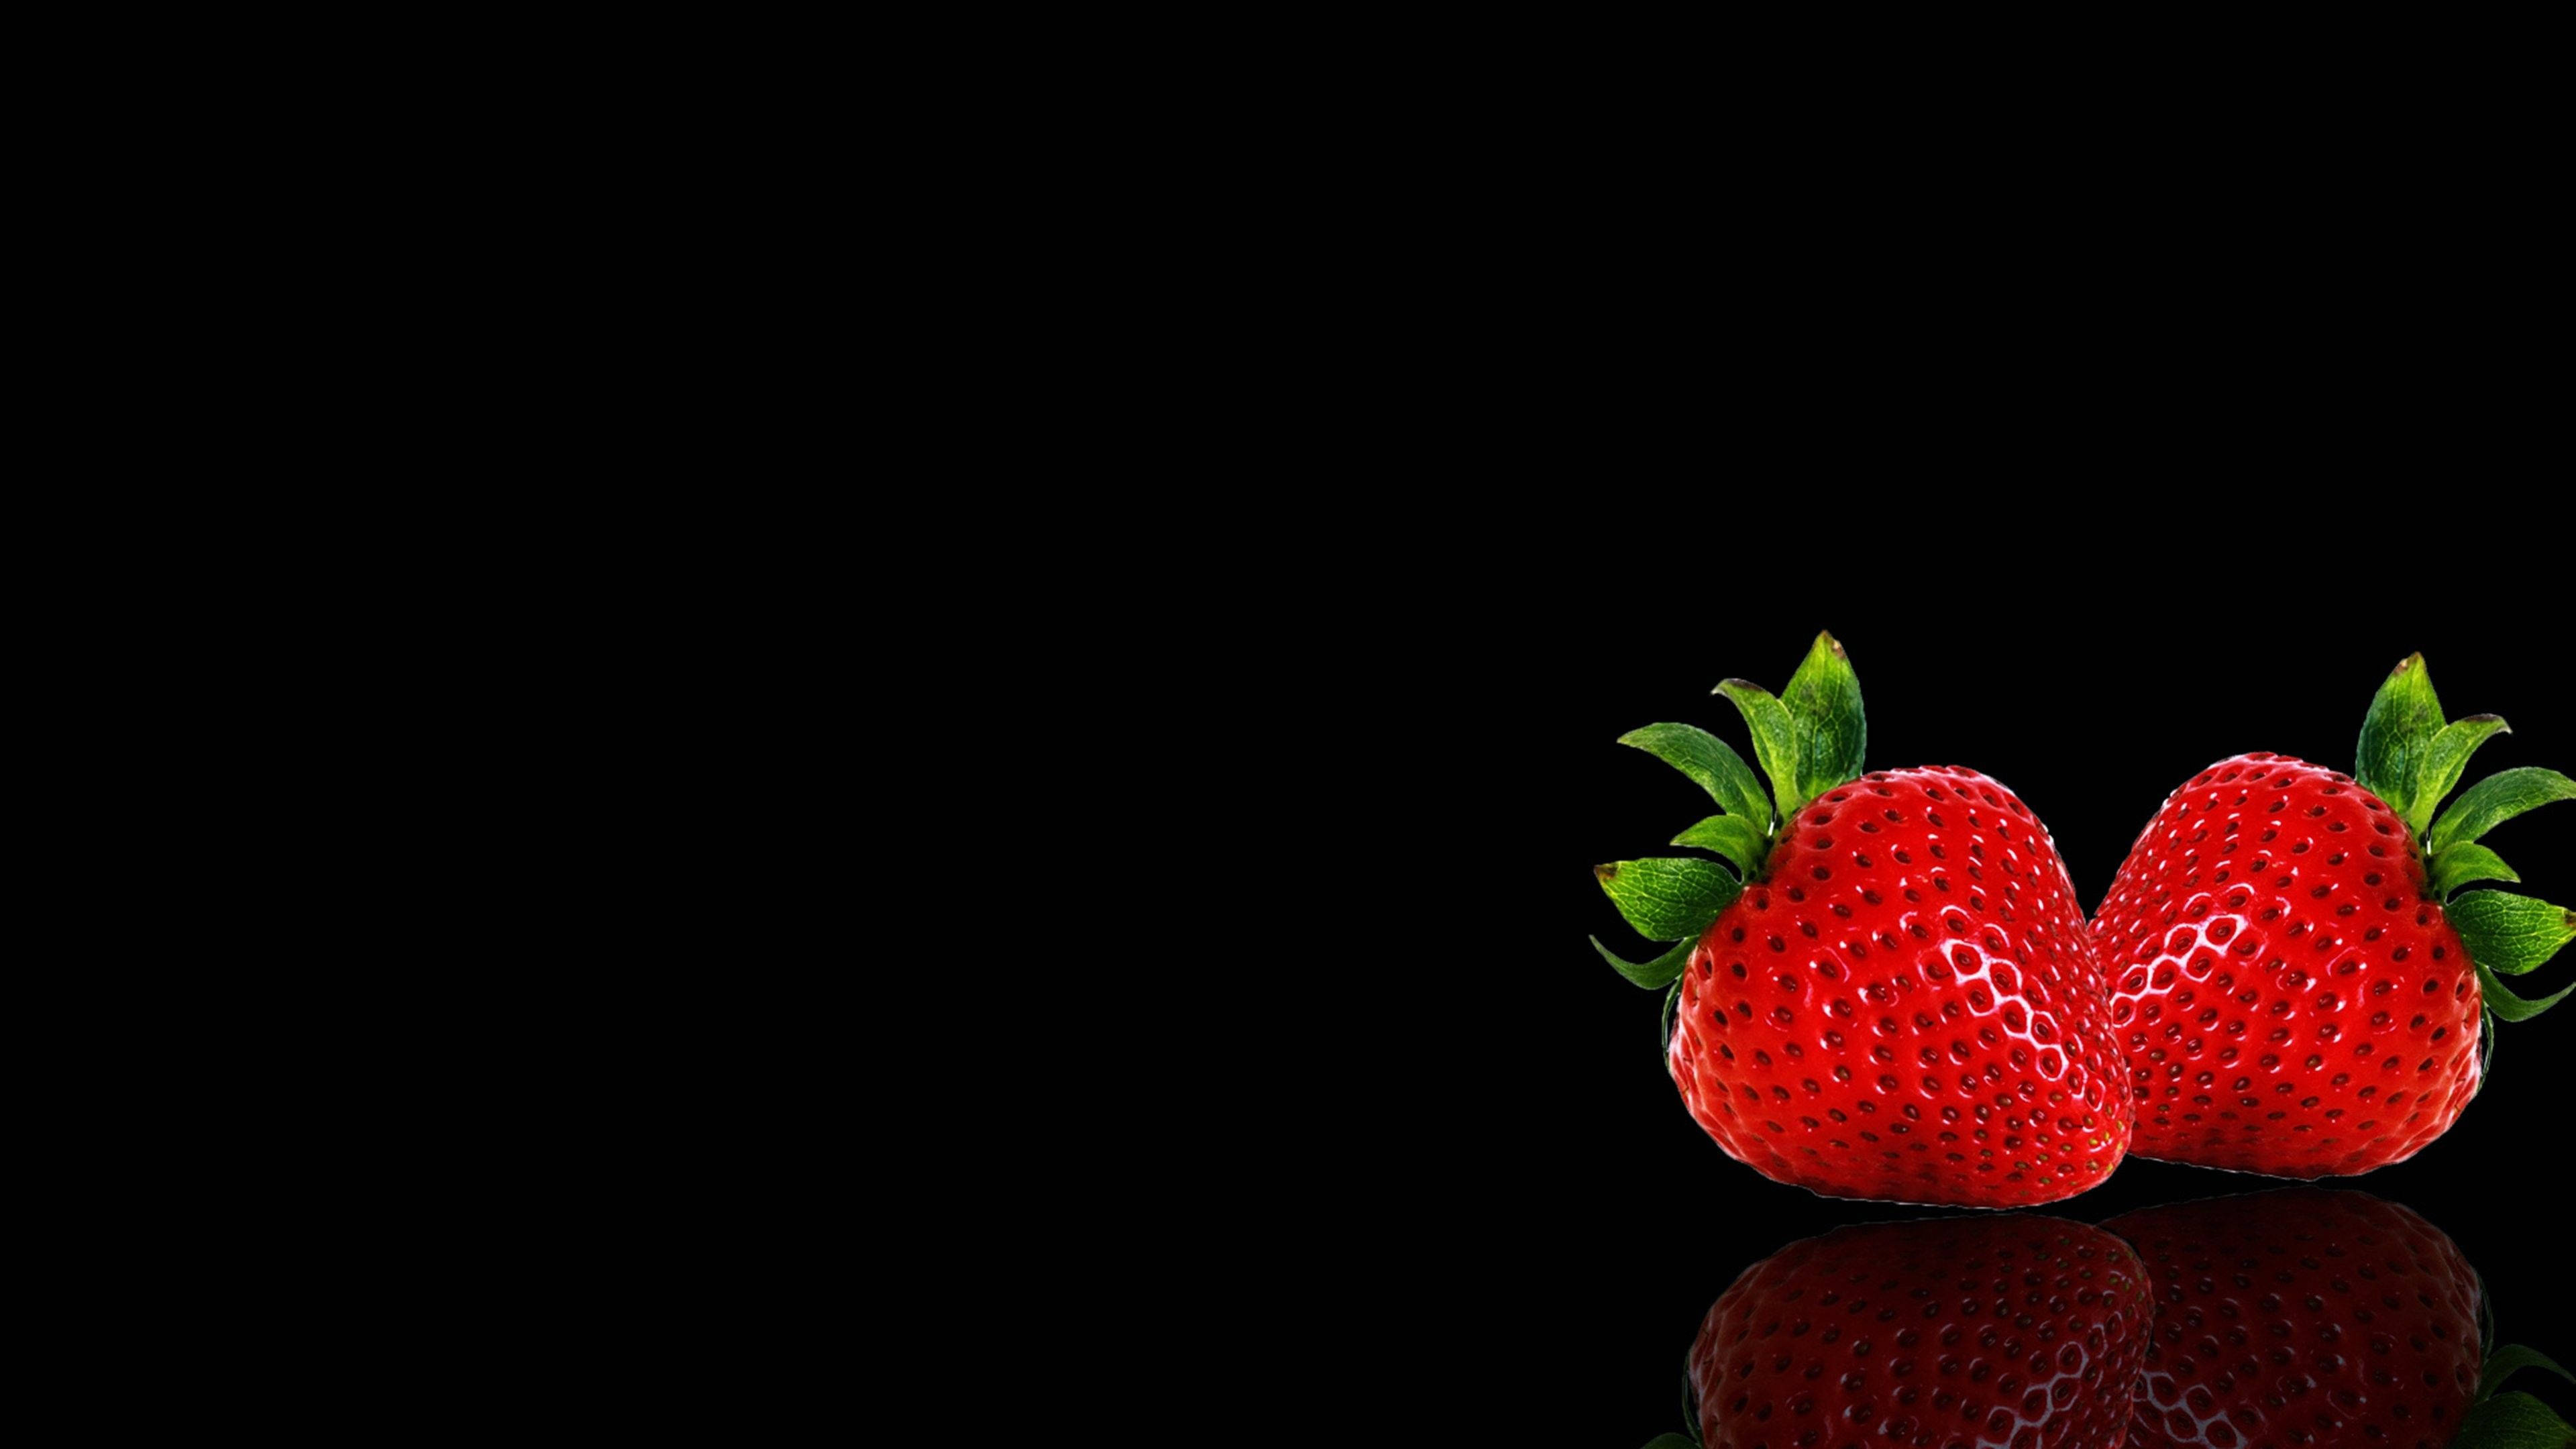 Black With Two Fruits Strawberry Desktop Wallpaper